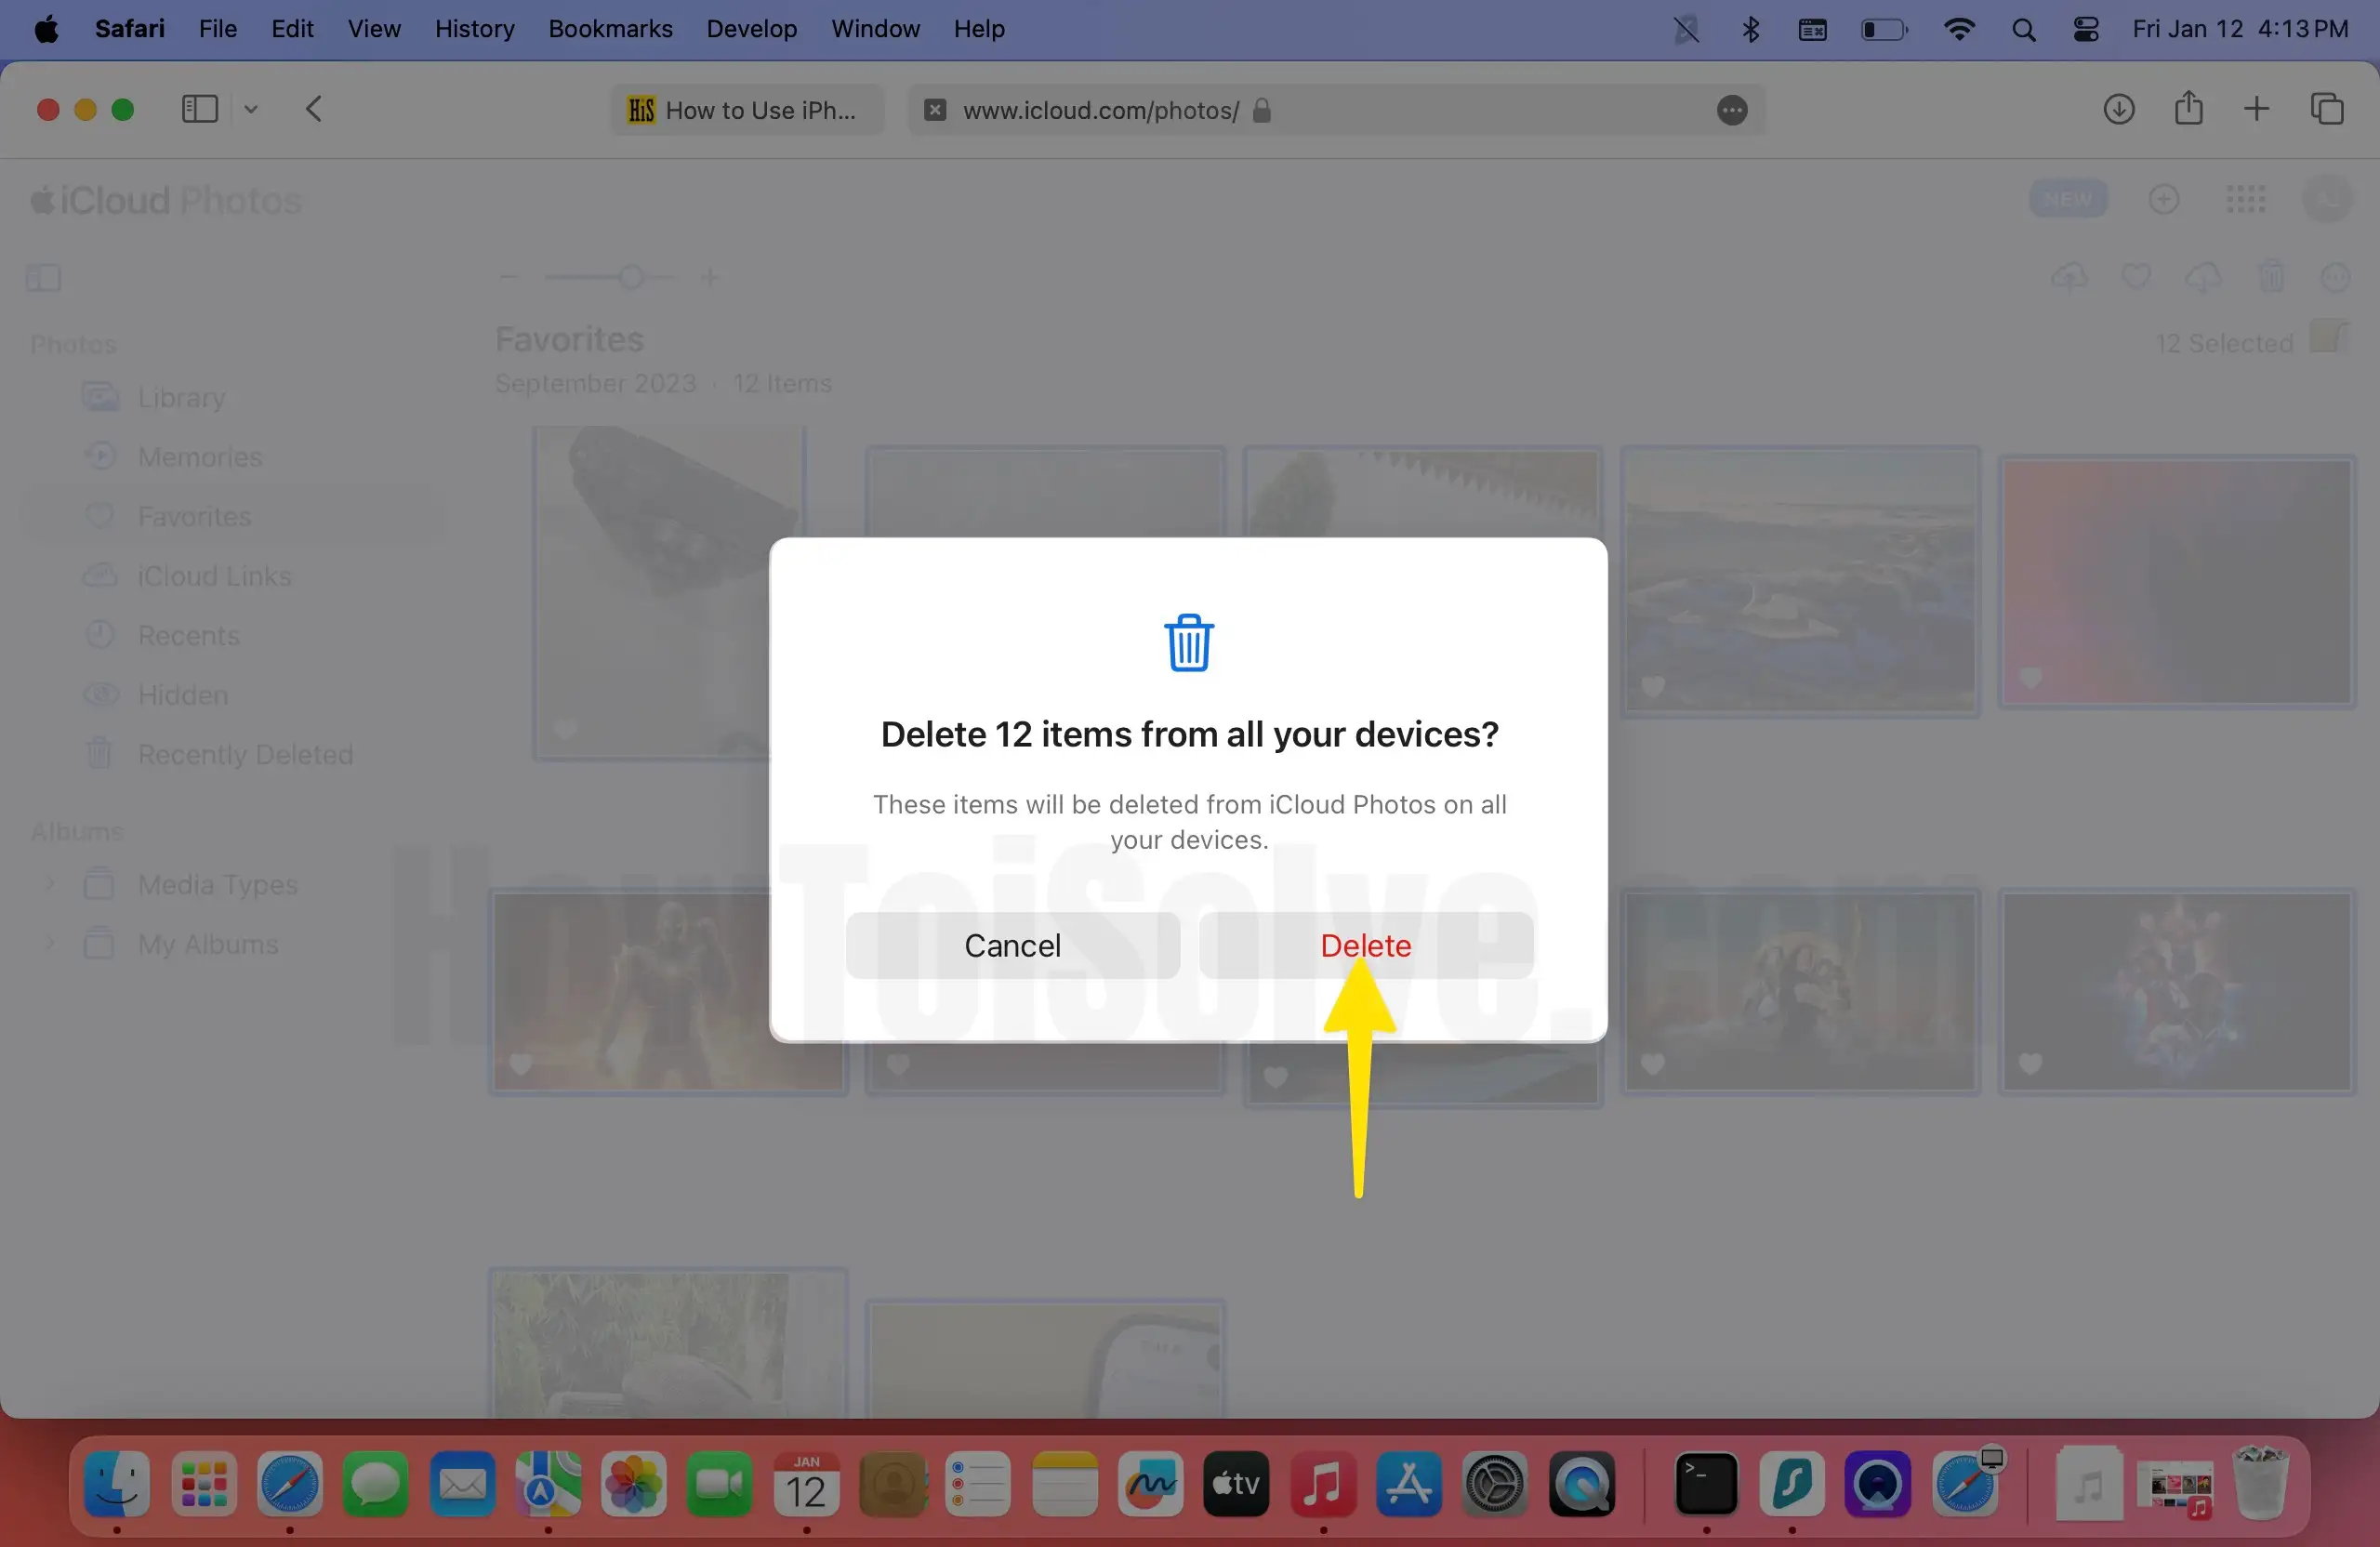 Tap on Delete For Confirmation on Mac